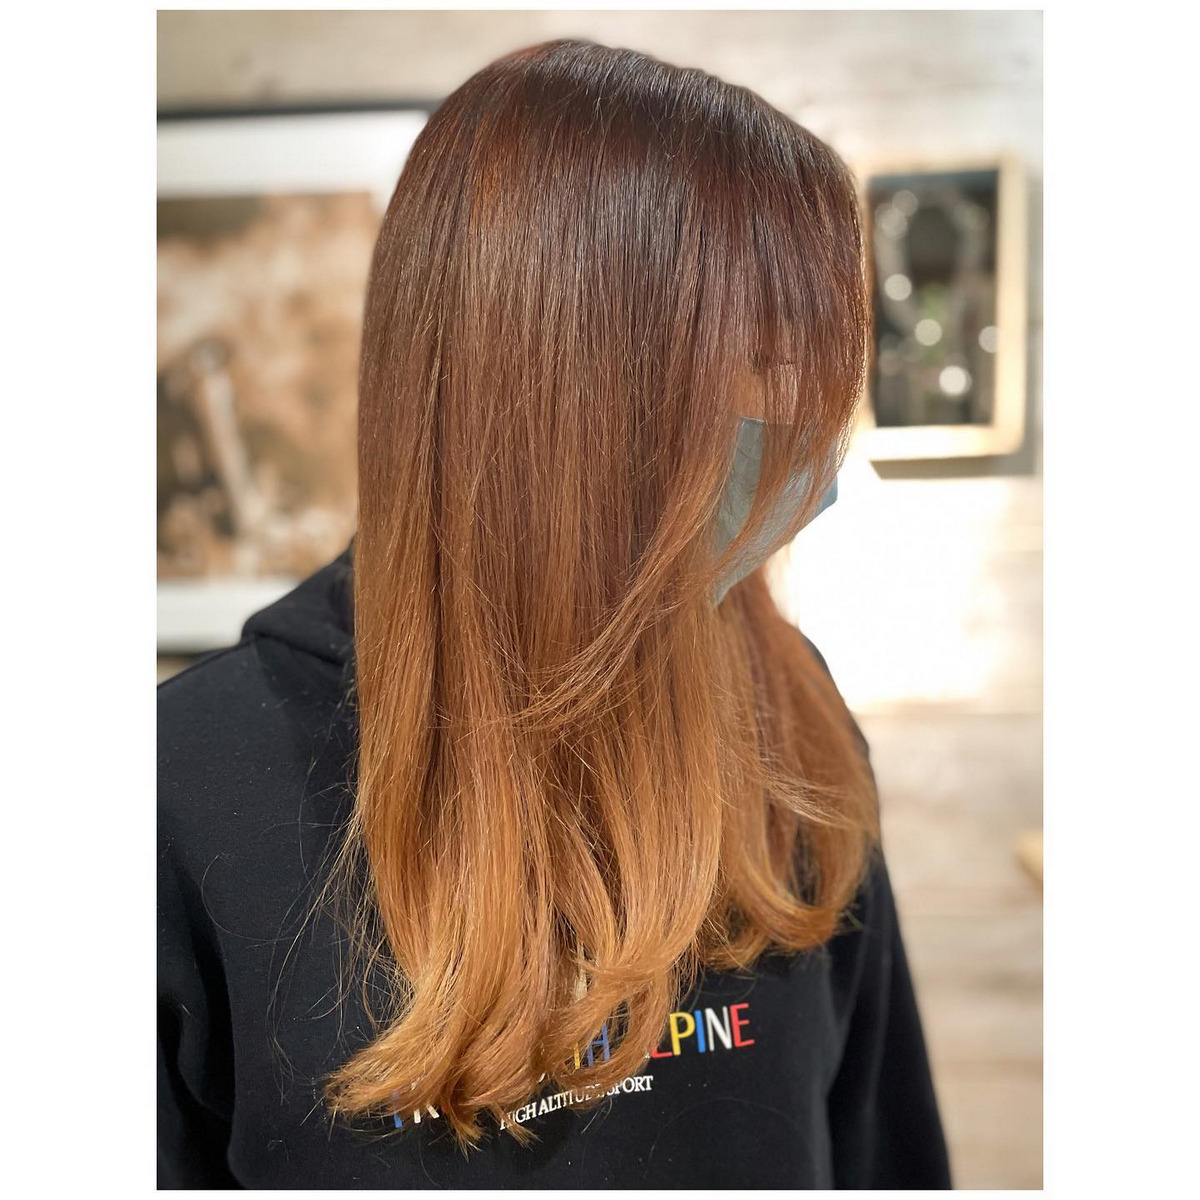 Ginger Ombre Hair